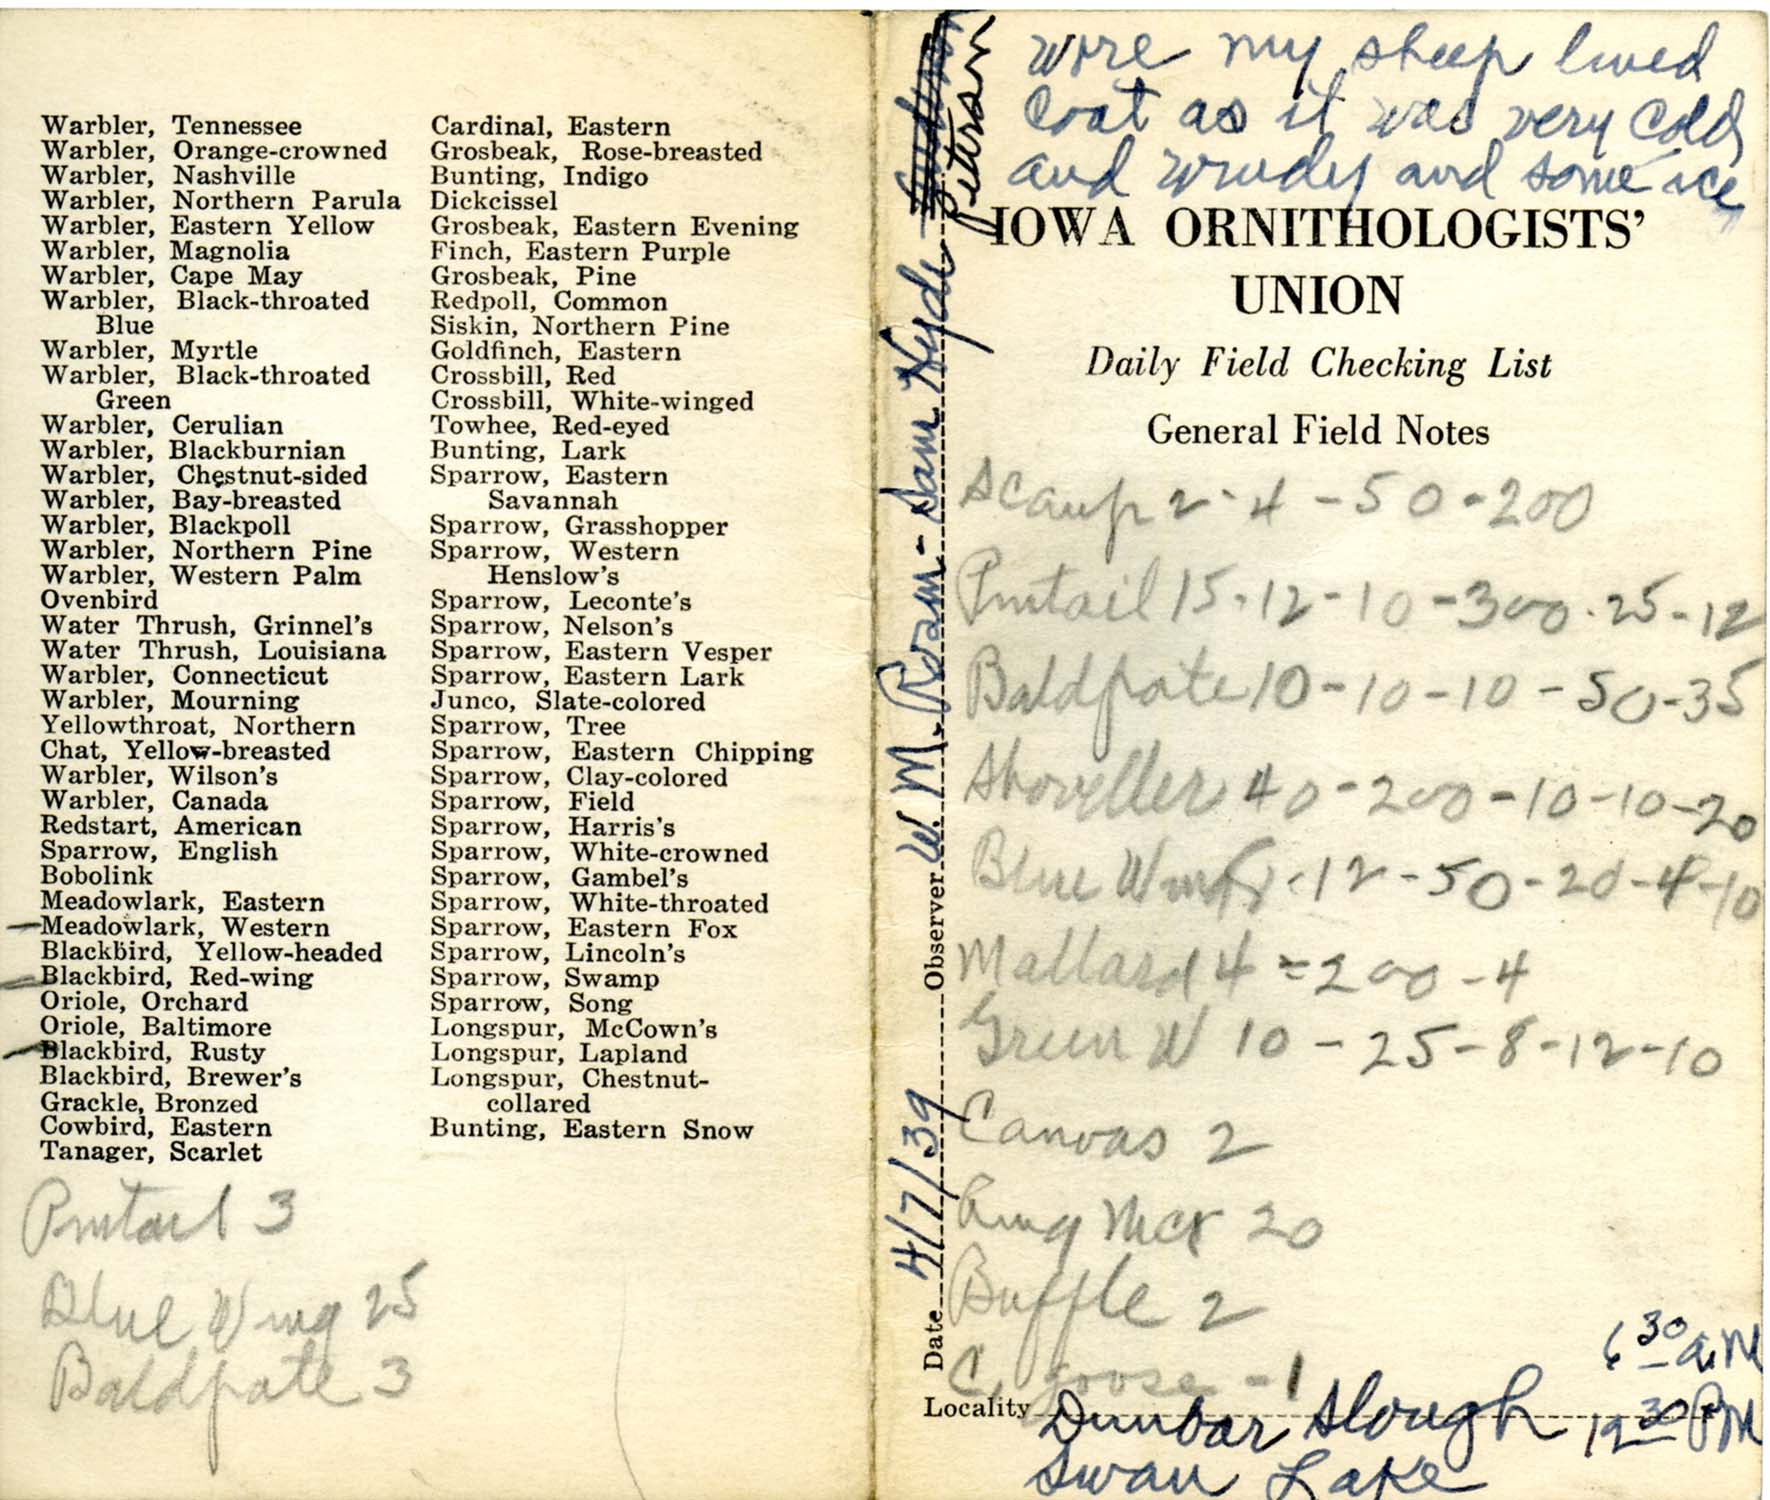 Daily field checking list by Walter Rosene, April 7, 1939